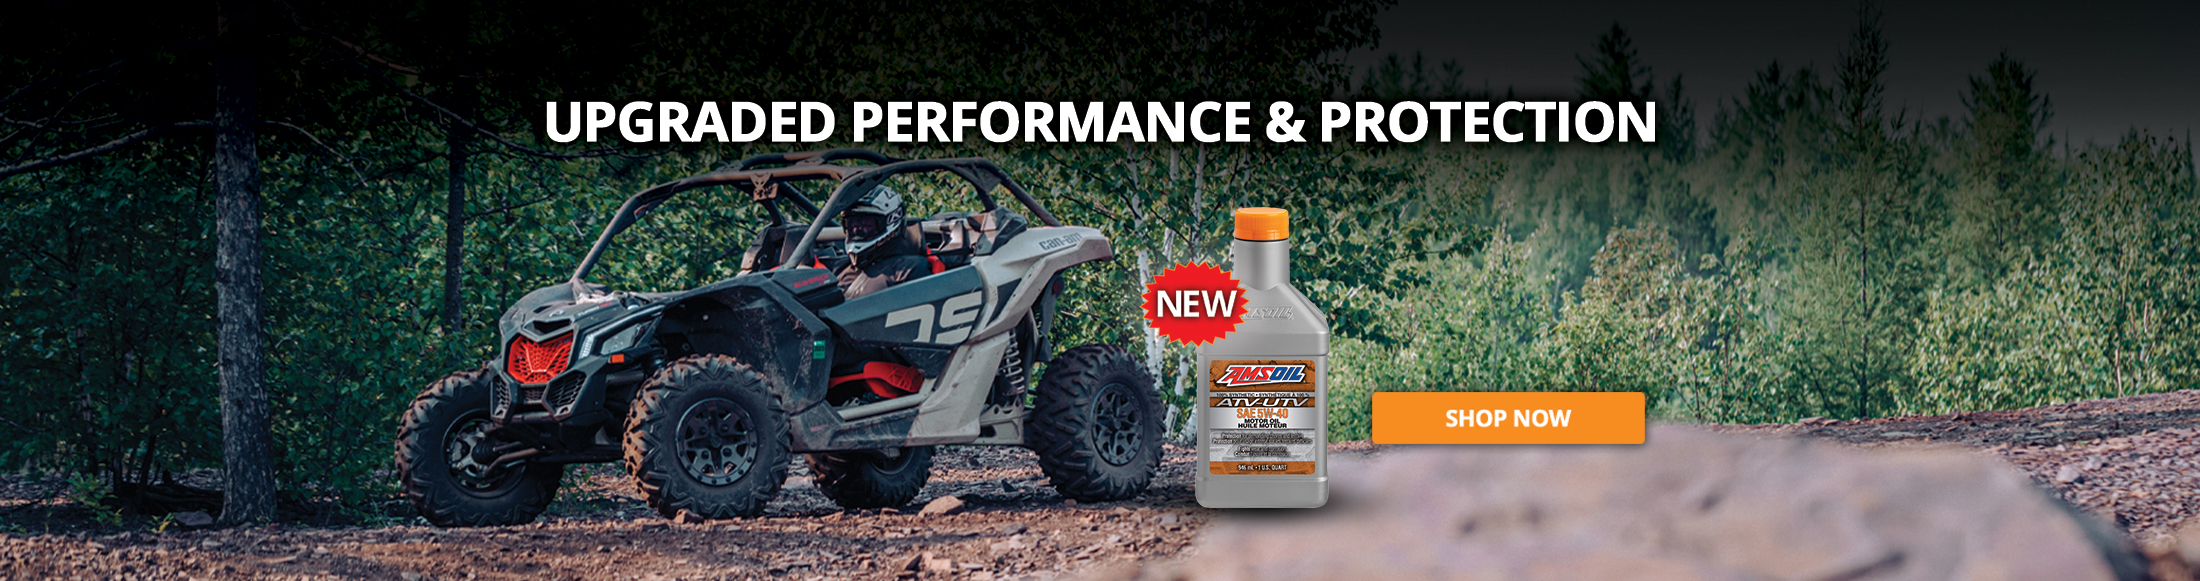 Upgraded Performance and Protection - Shop Now.